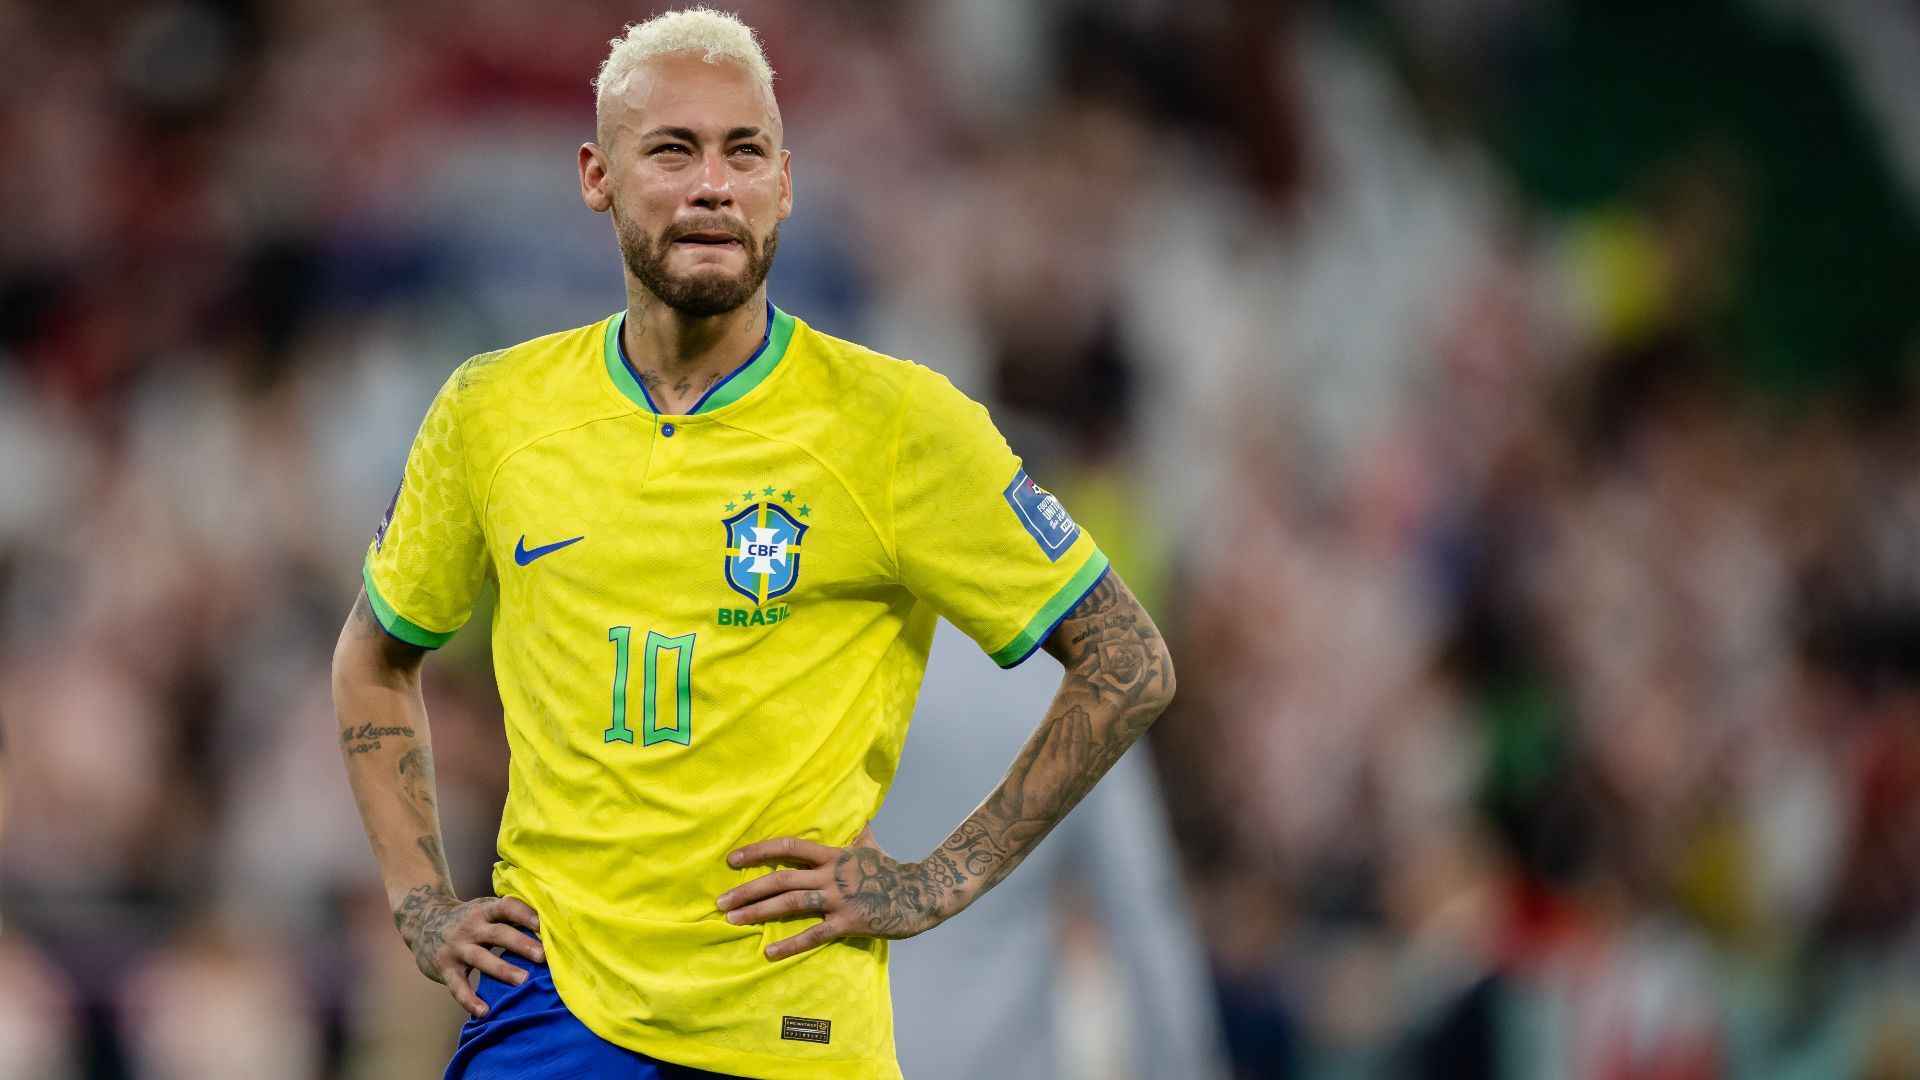 Neymar Unsure If He'll Play for Brazil Again After World Cup Exit